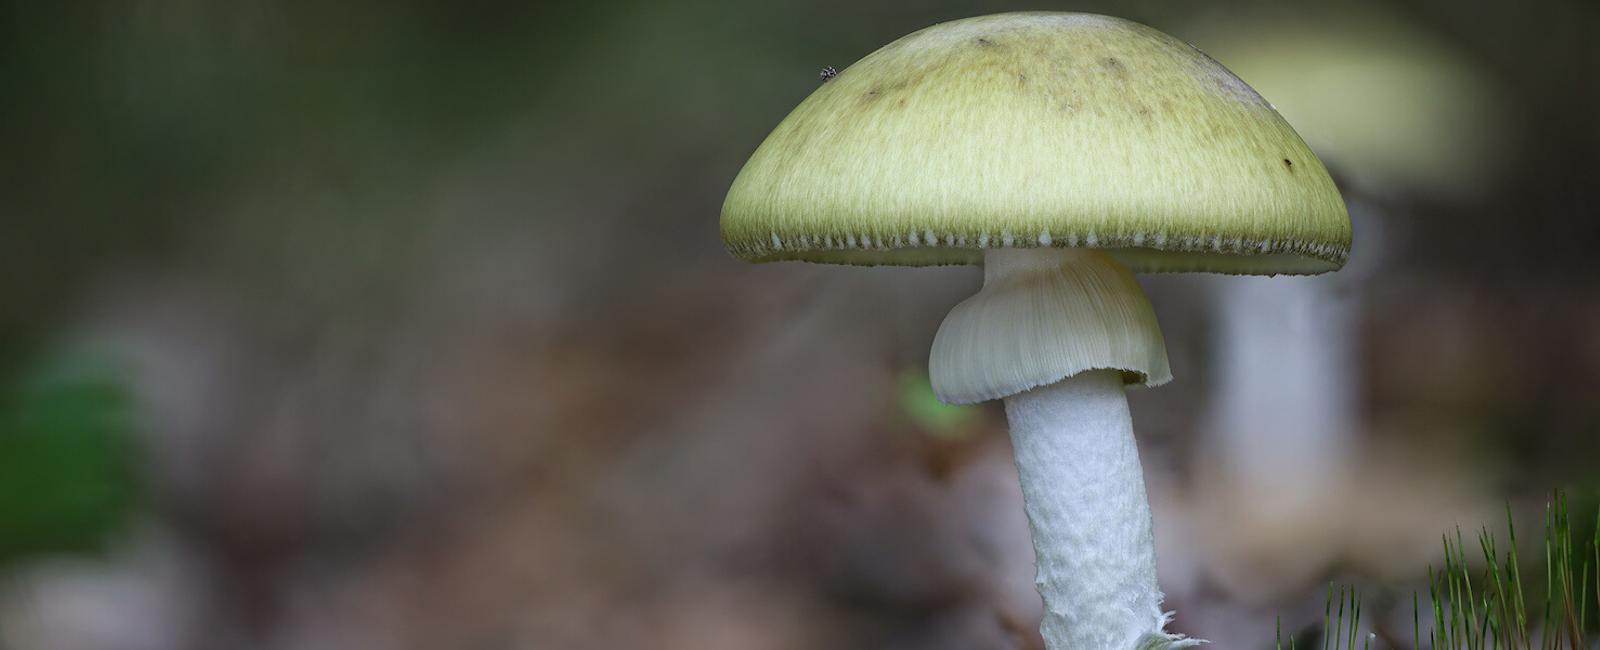 The Complete Guide to Amanita Phalloides